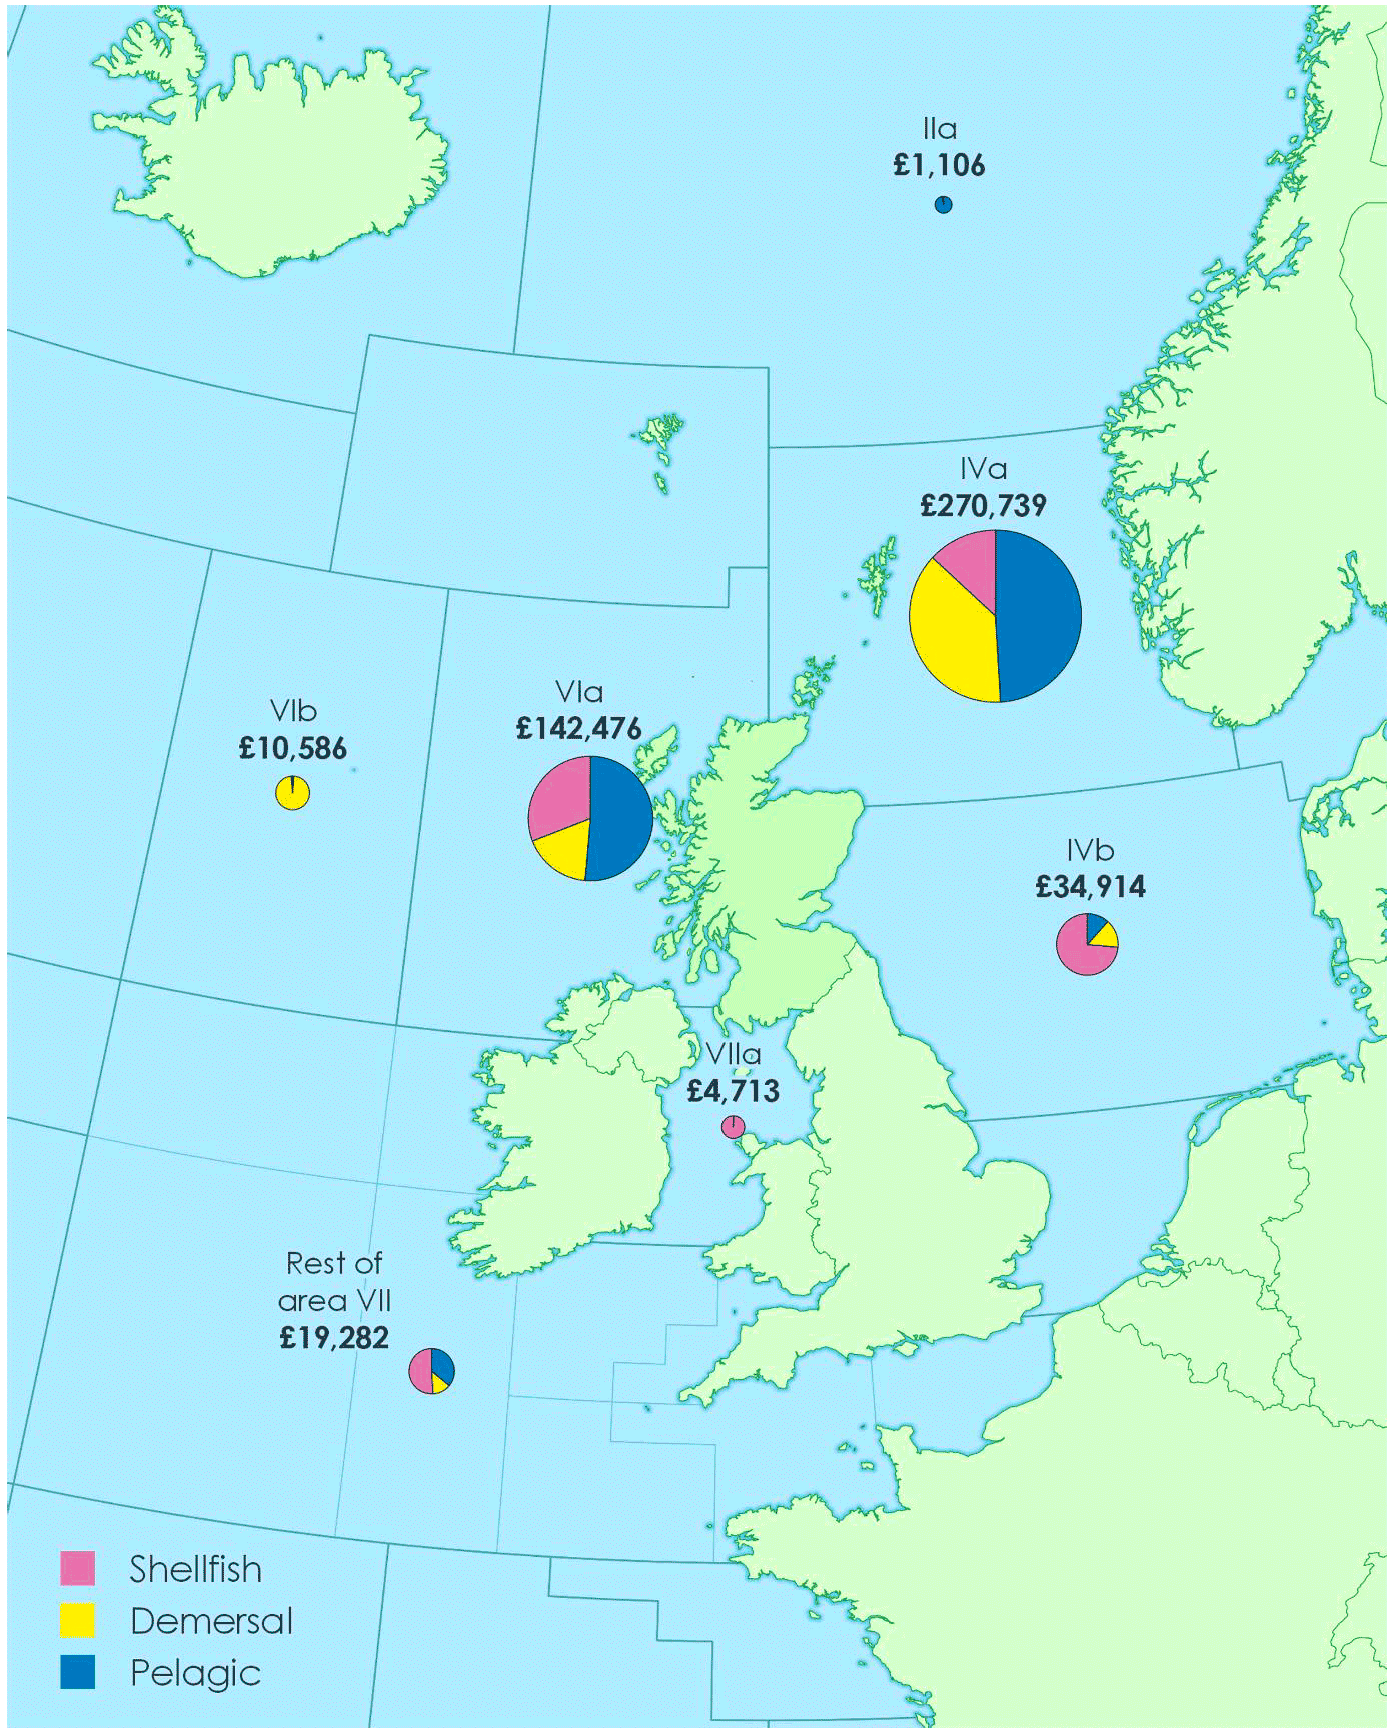 Value of landings (£’thousands) by Scottish vessels by area of capture and species type in 2020